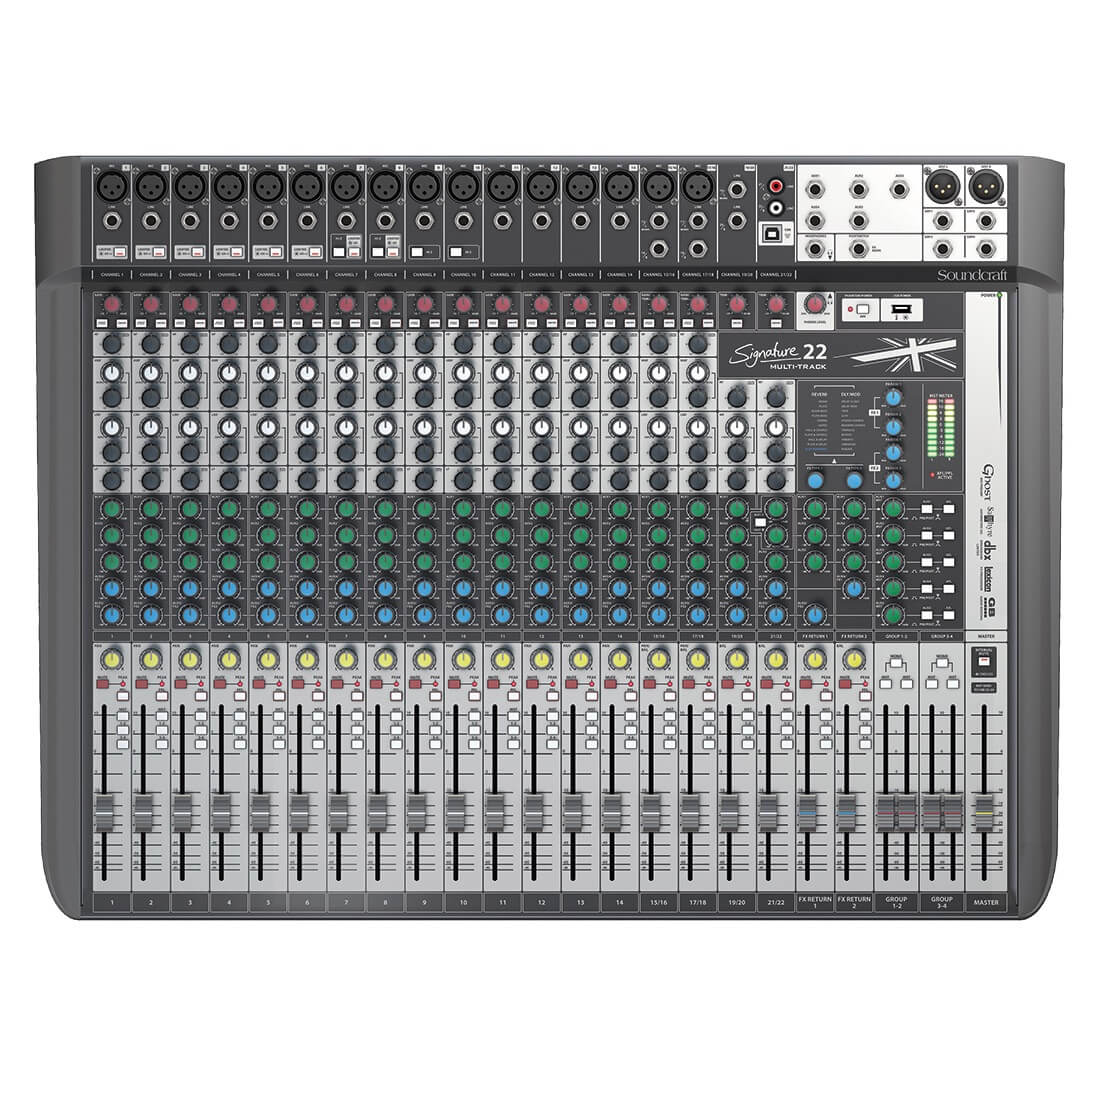 Soundcraft Signature 22MTK - 22-channel Analog Mixer with Lexicon Effects, top